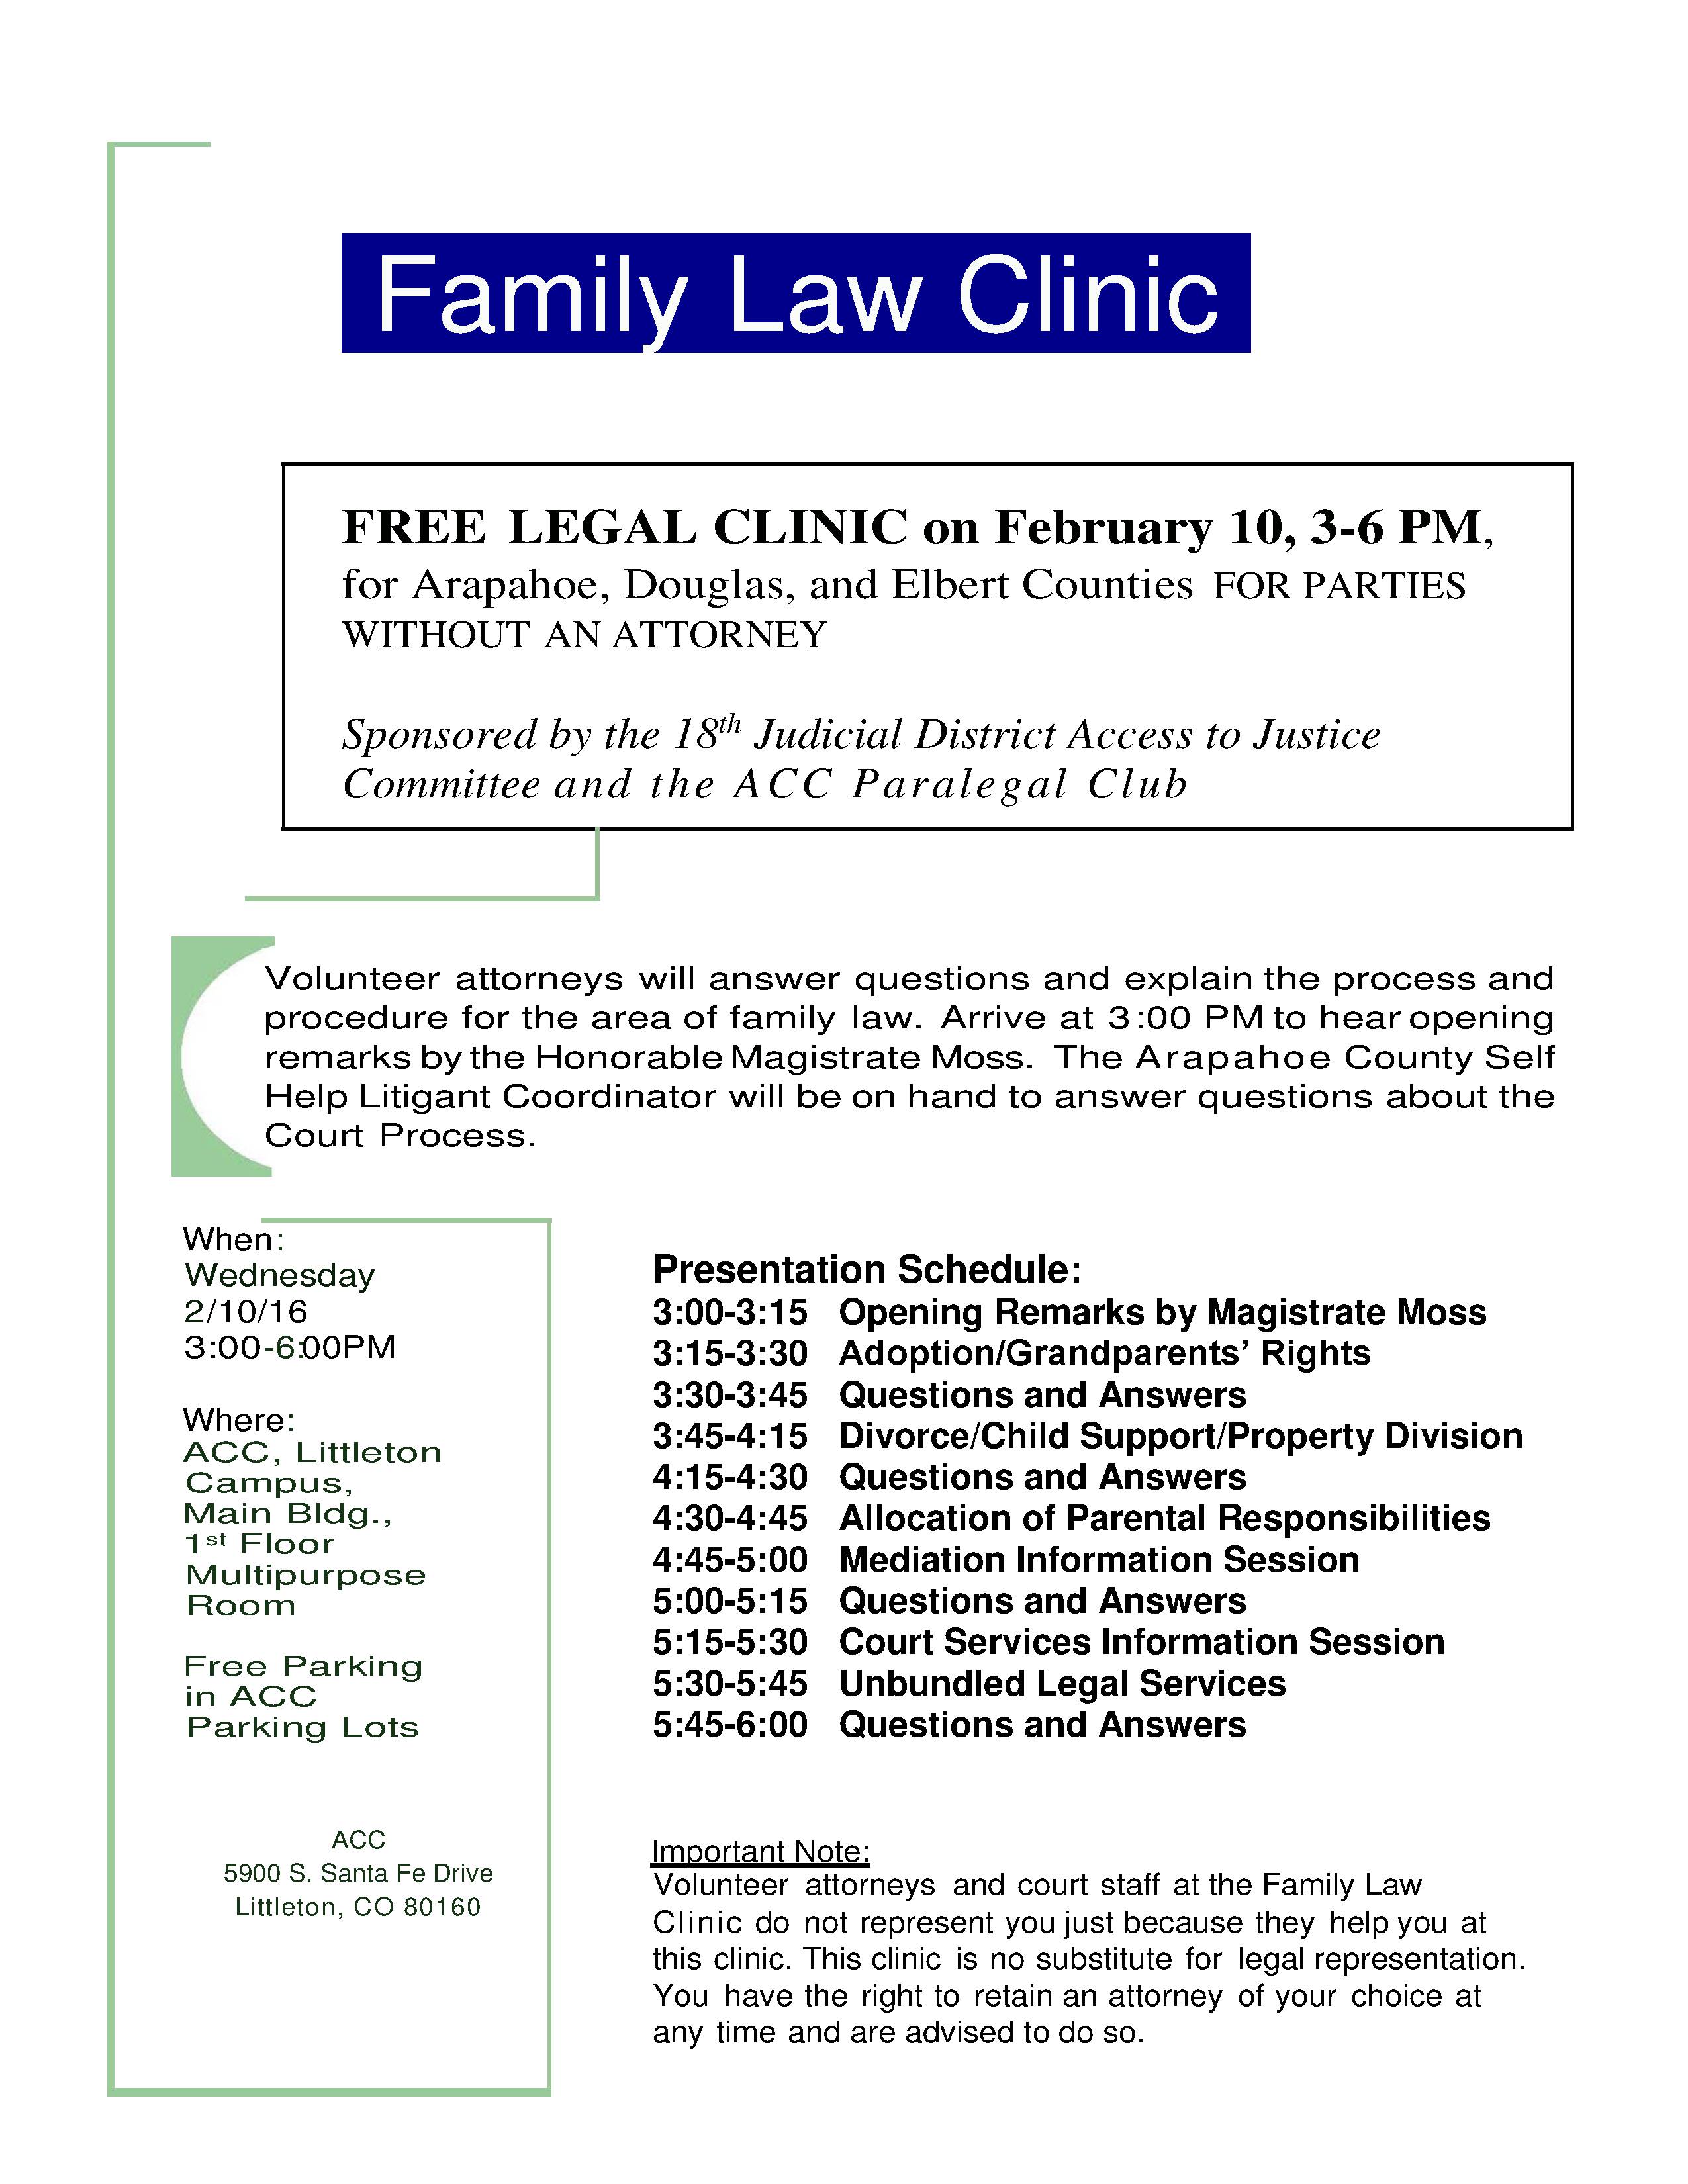 Free Family Law Clinic in Littleton on Feb. 10th